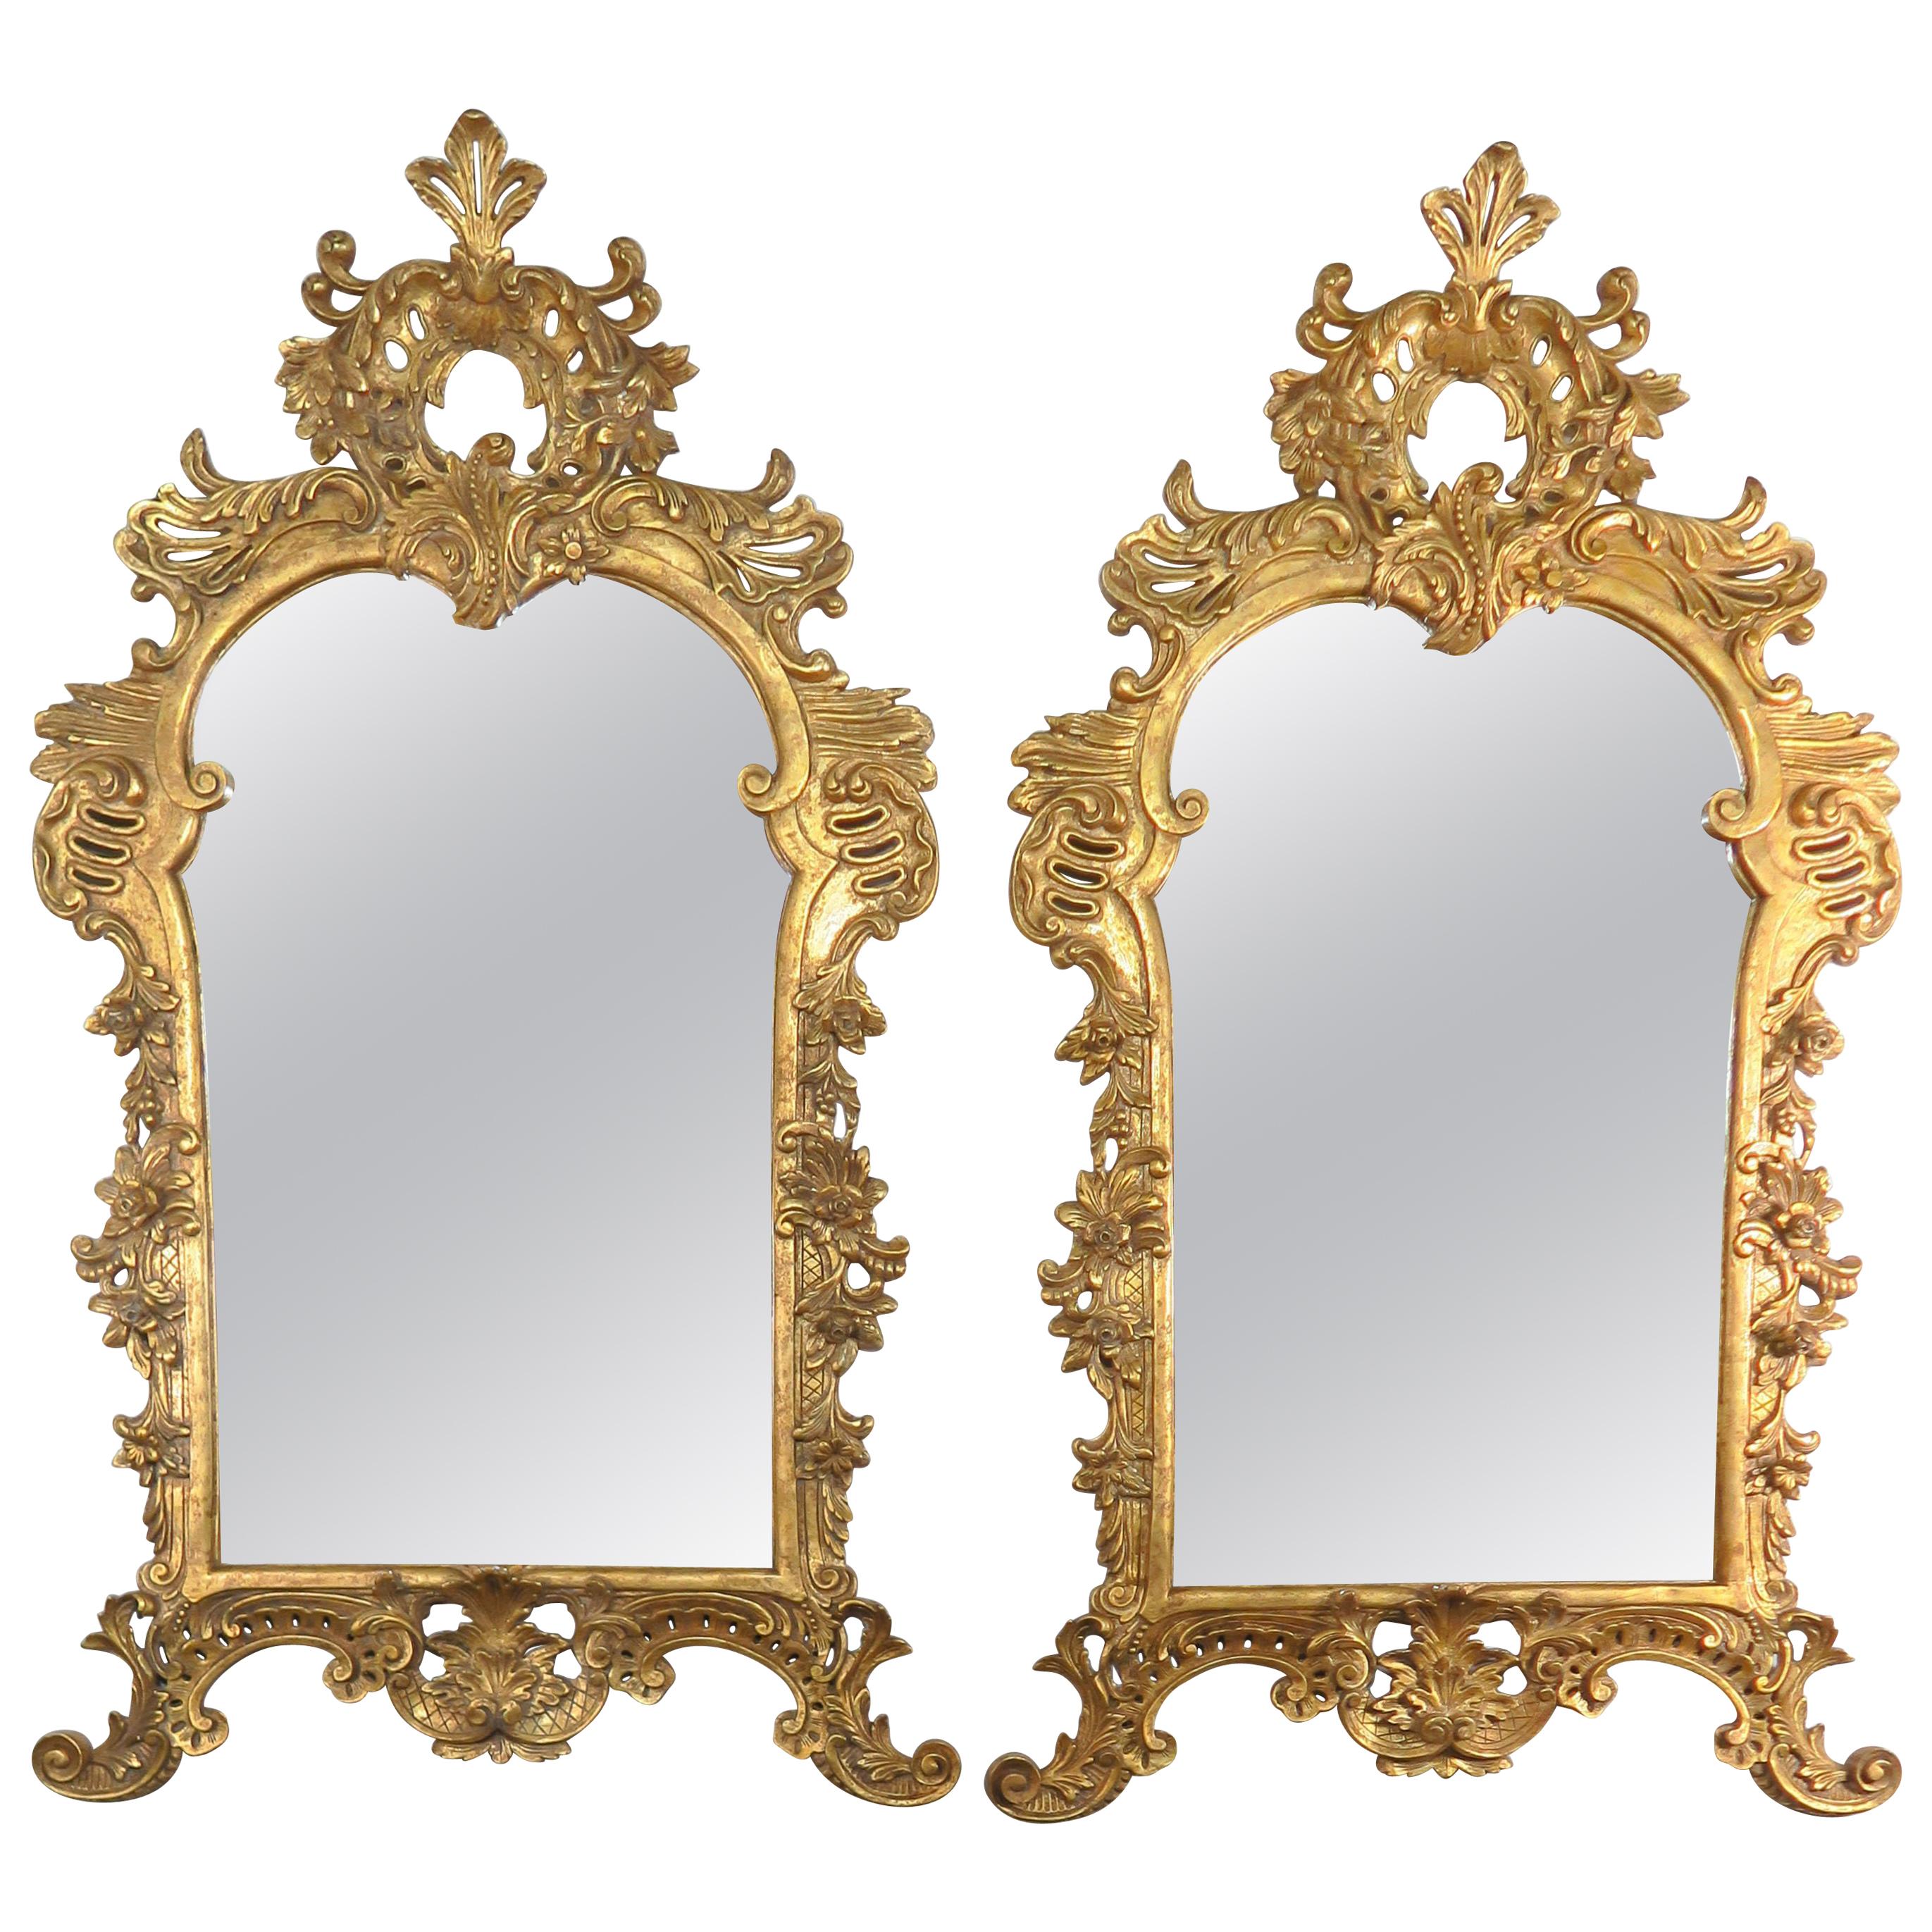 Pair of Monumental French Louis XV Style Giltwood Mirrors